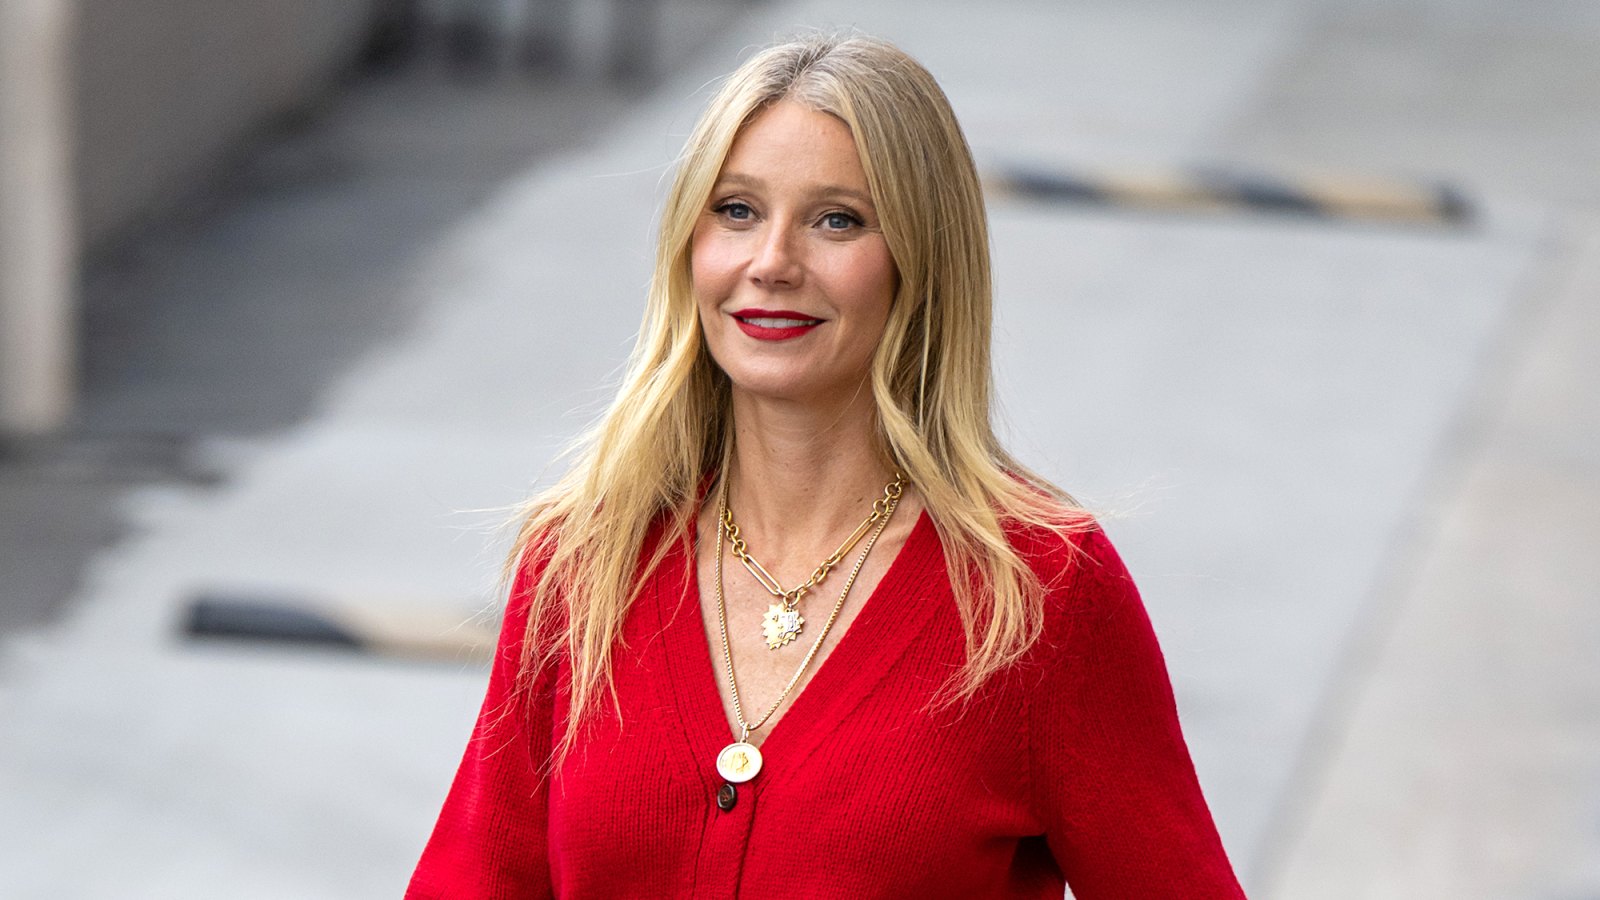 Gwyneth Paltrow Asks Fans If She Should Go Gray or Stay Blonde